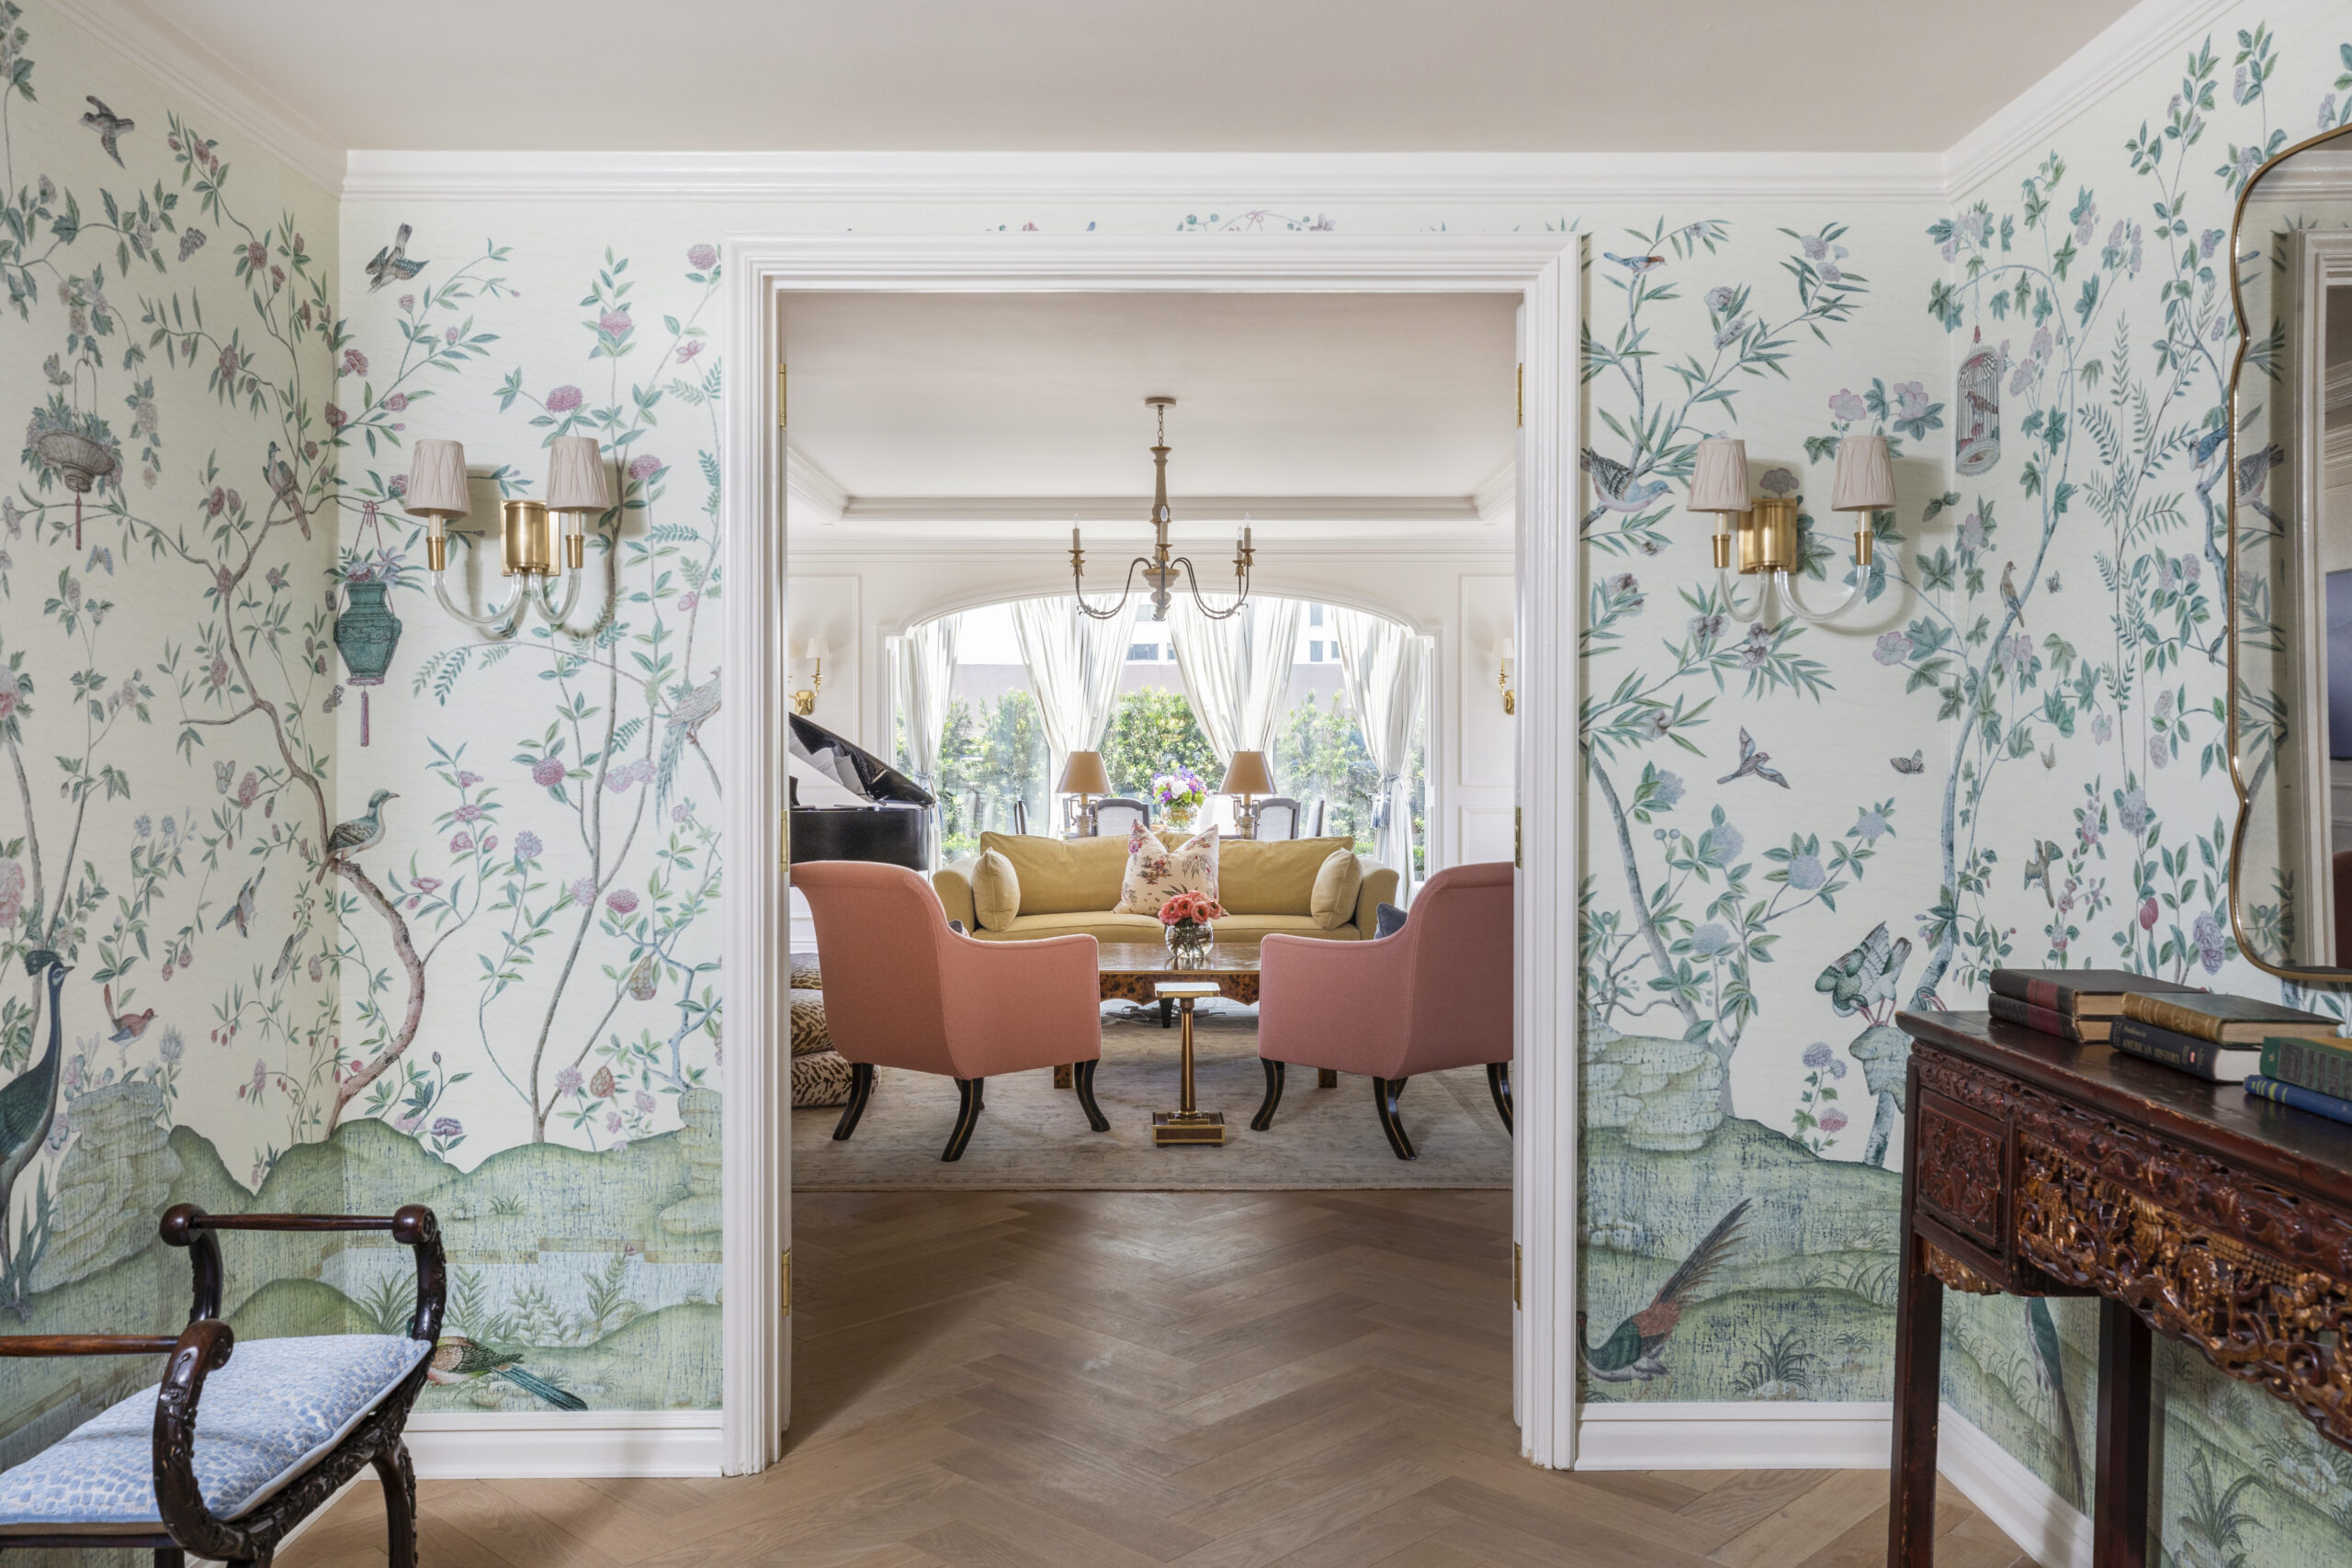 Look Inside New Orleans’ Newest Presidential Suite With English Gardens And Wild Décor - The Windsor Court